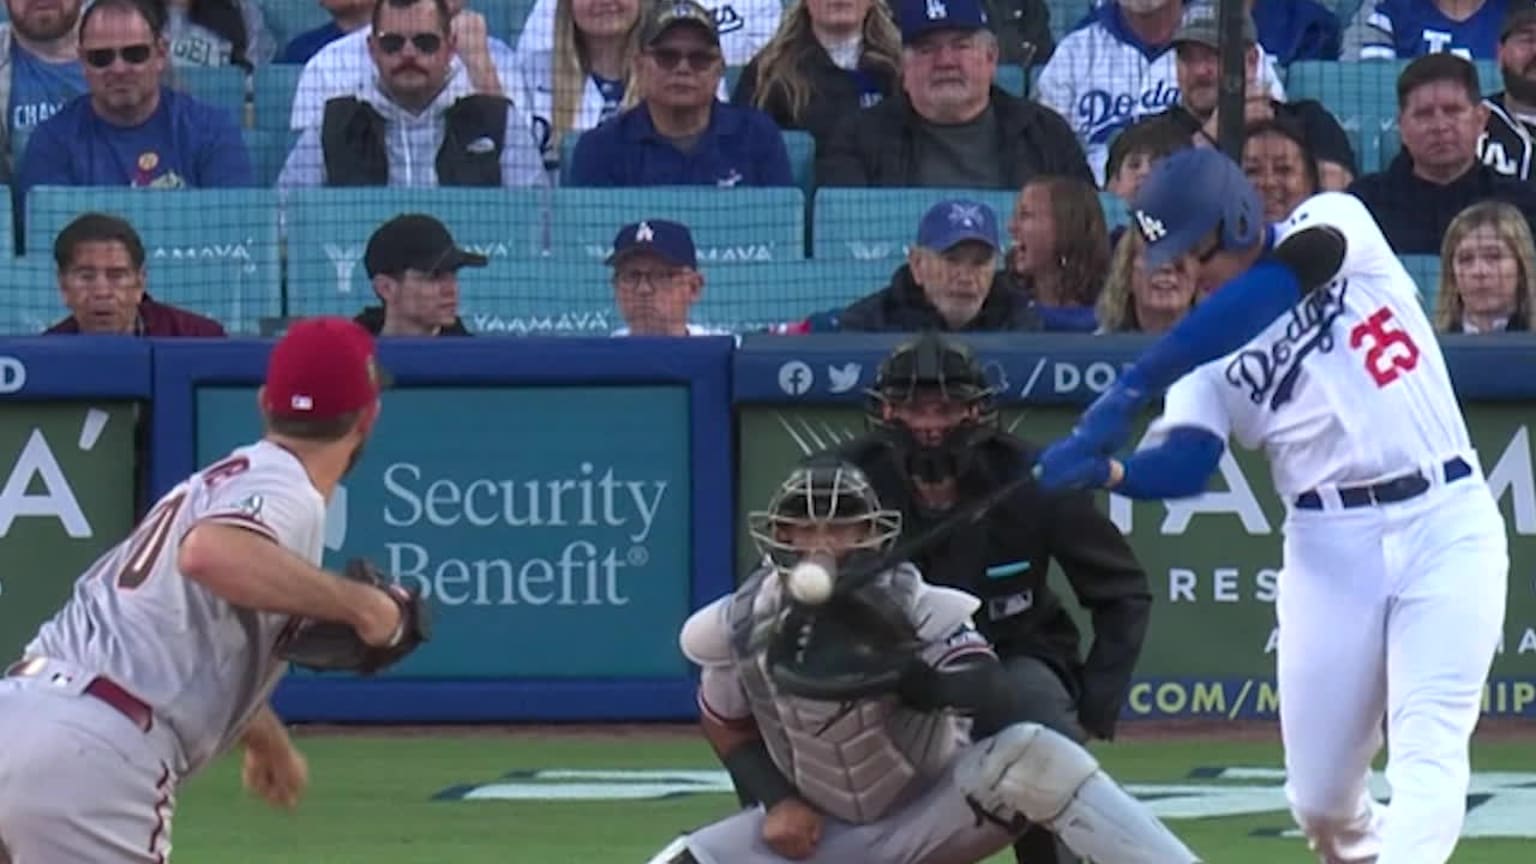 Trayce Thompson crushes a grand slam to give the Dodgers a 5-0 lead vs. the  Diamondbacks in the first inning